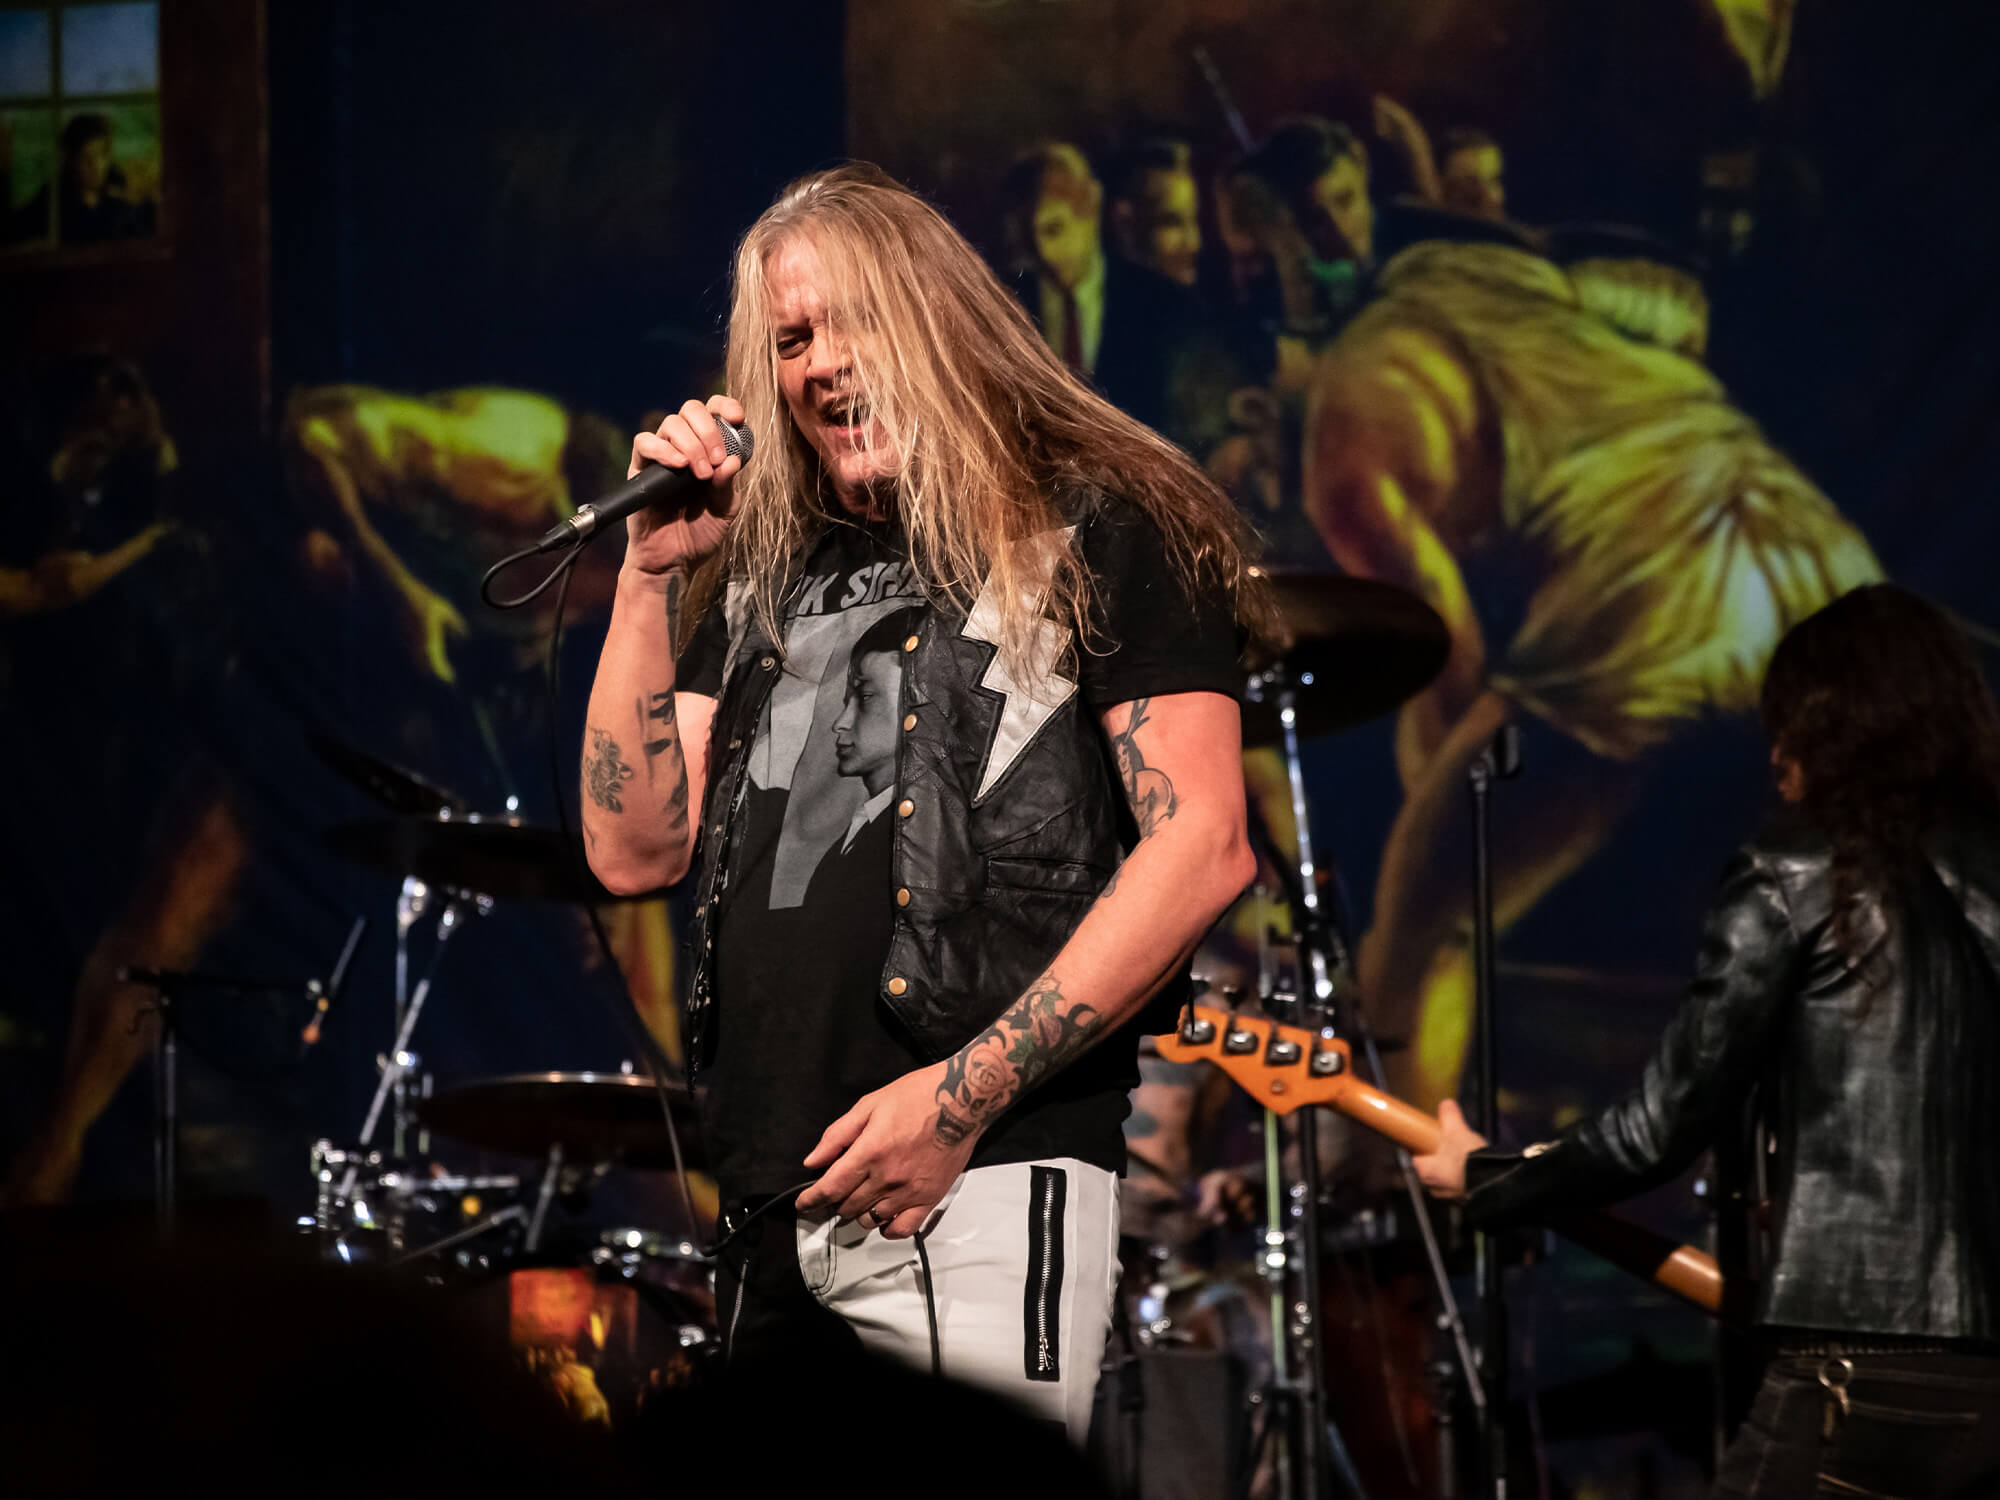 Sebastian Bach on stage singing into a mic